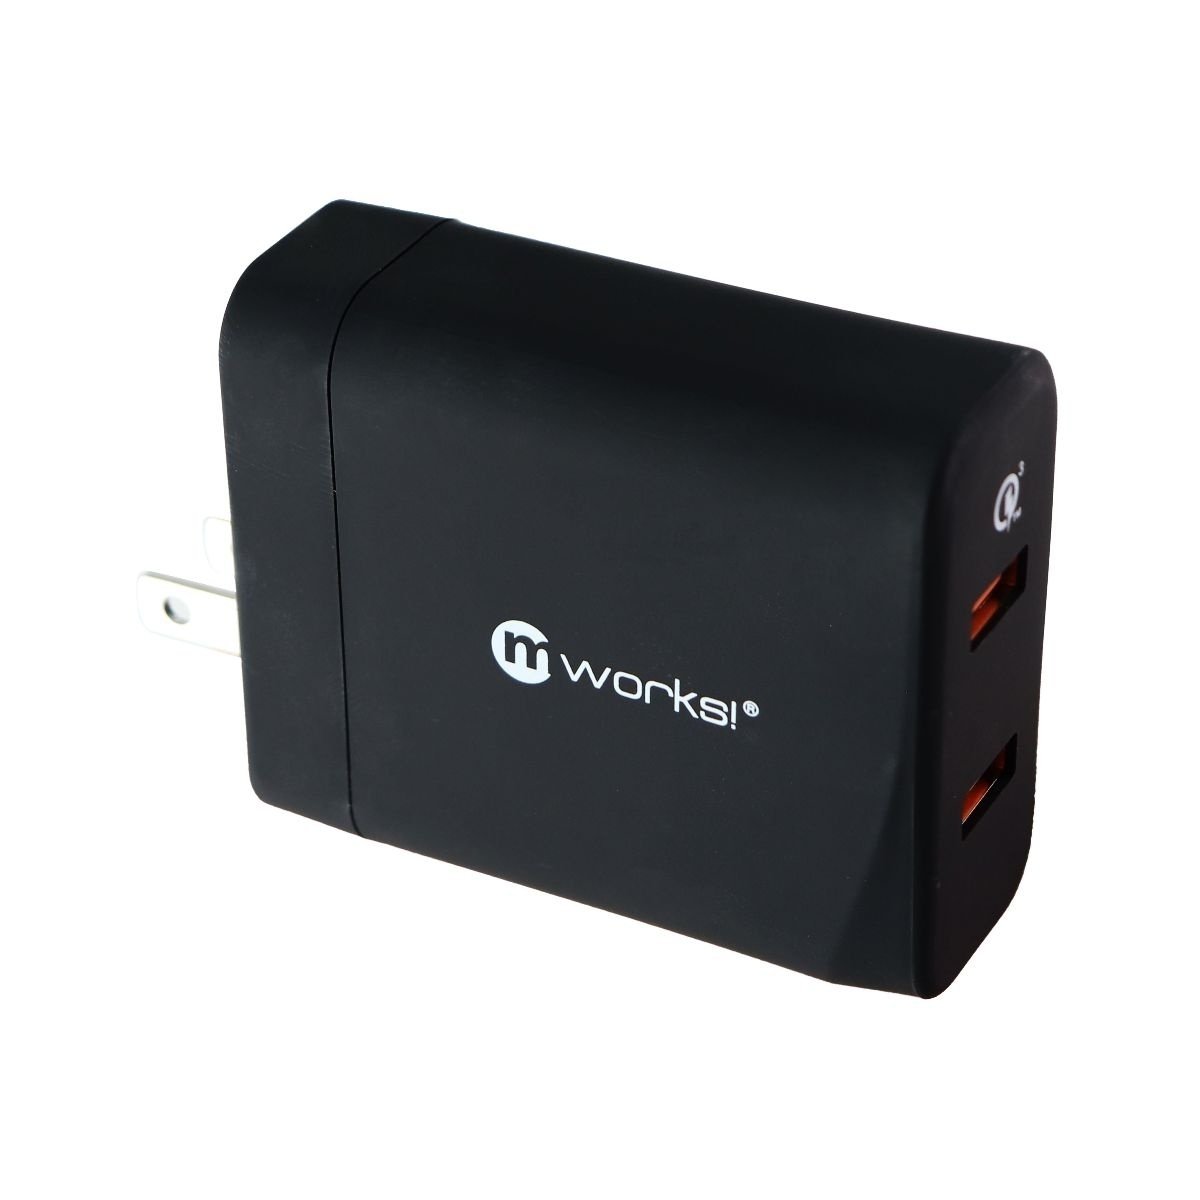 Mworks! MPOWER! Dual Port USB Wall Charger (Adaptive Output) - Black